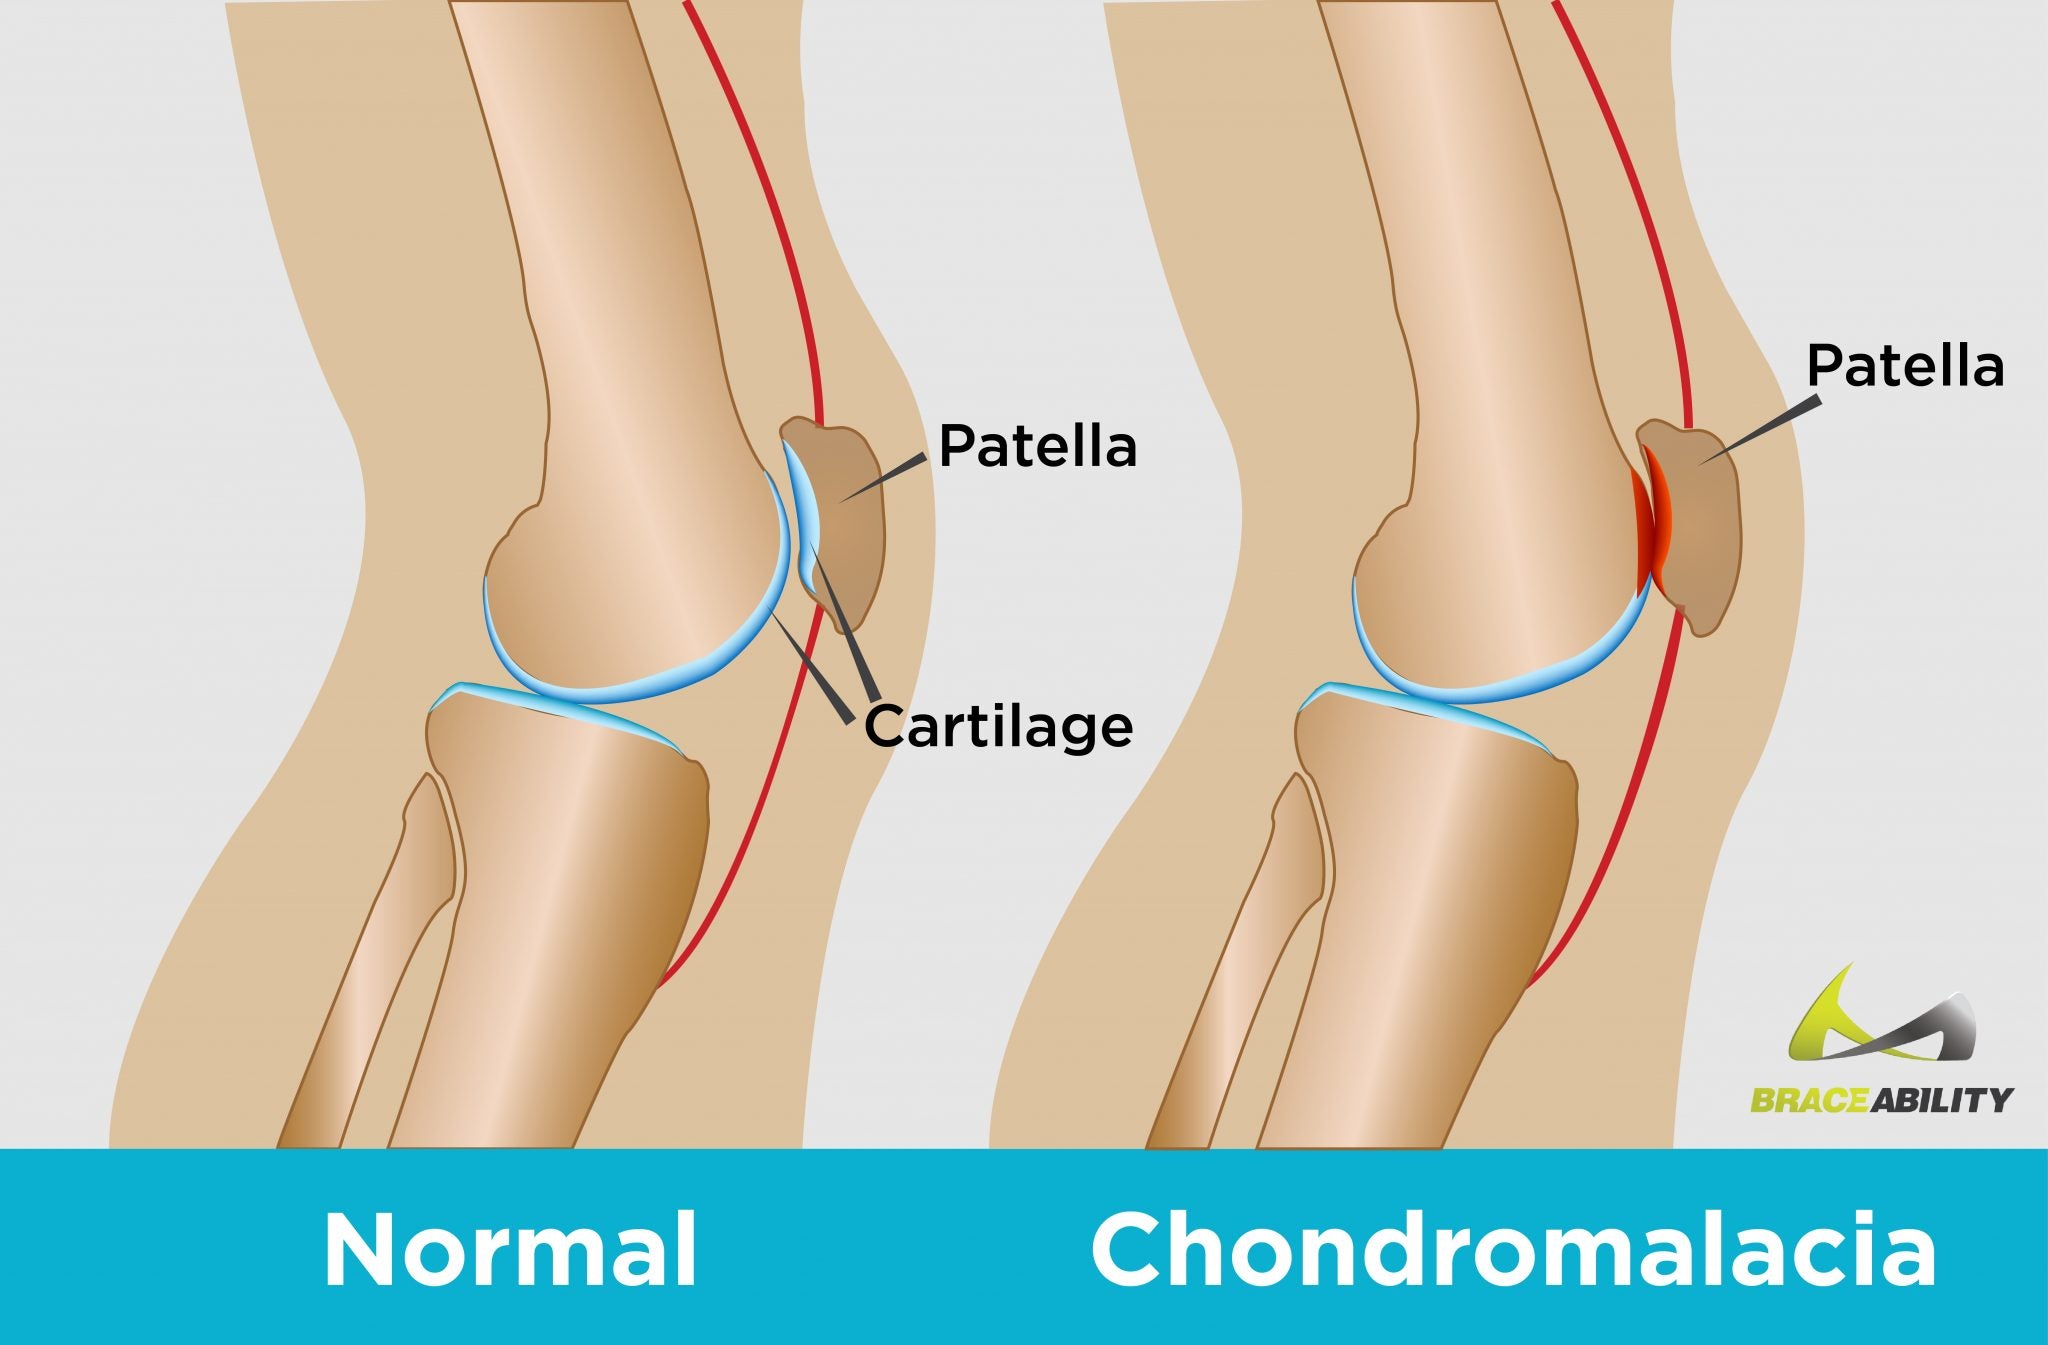 Cartilage in the knee deteriorates over time causing chondromalacia behind the kneecap